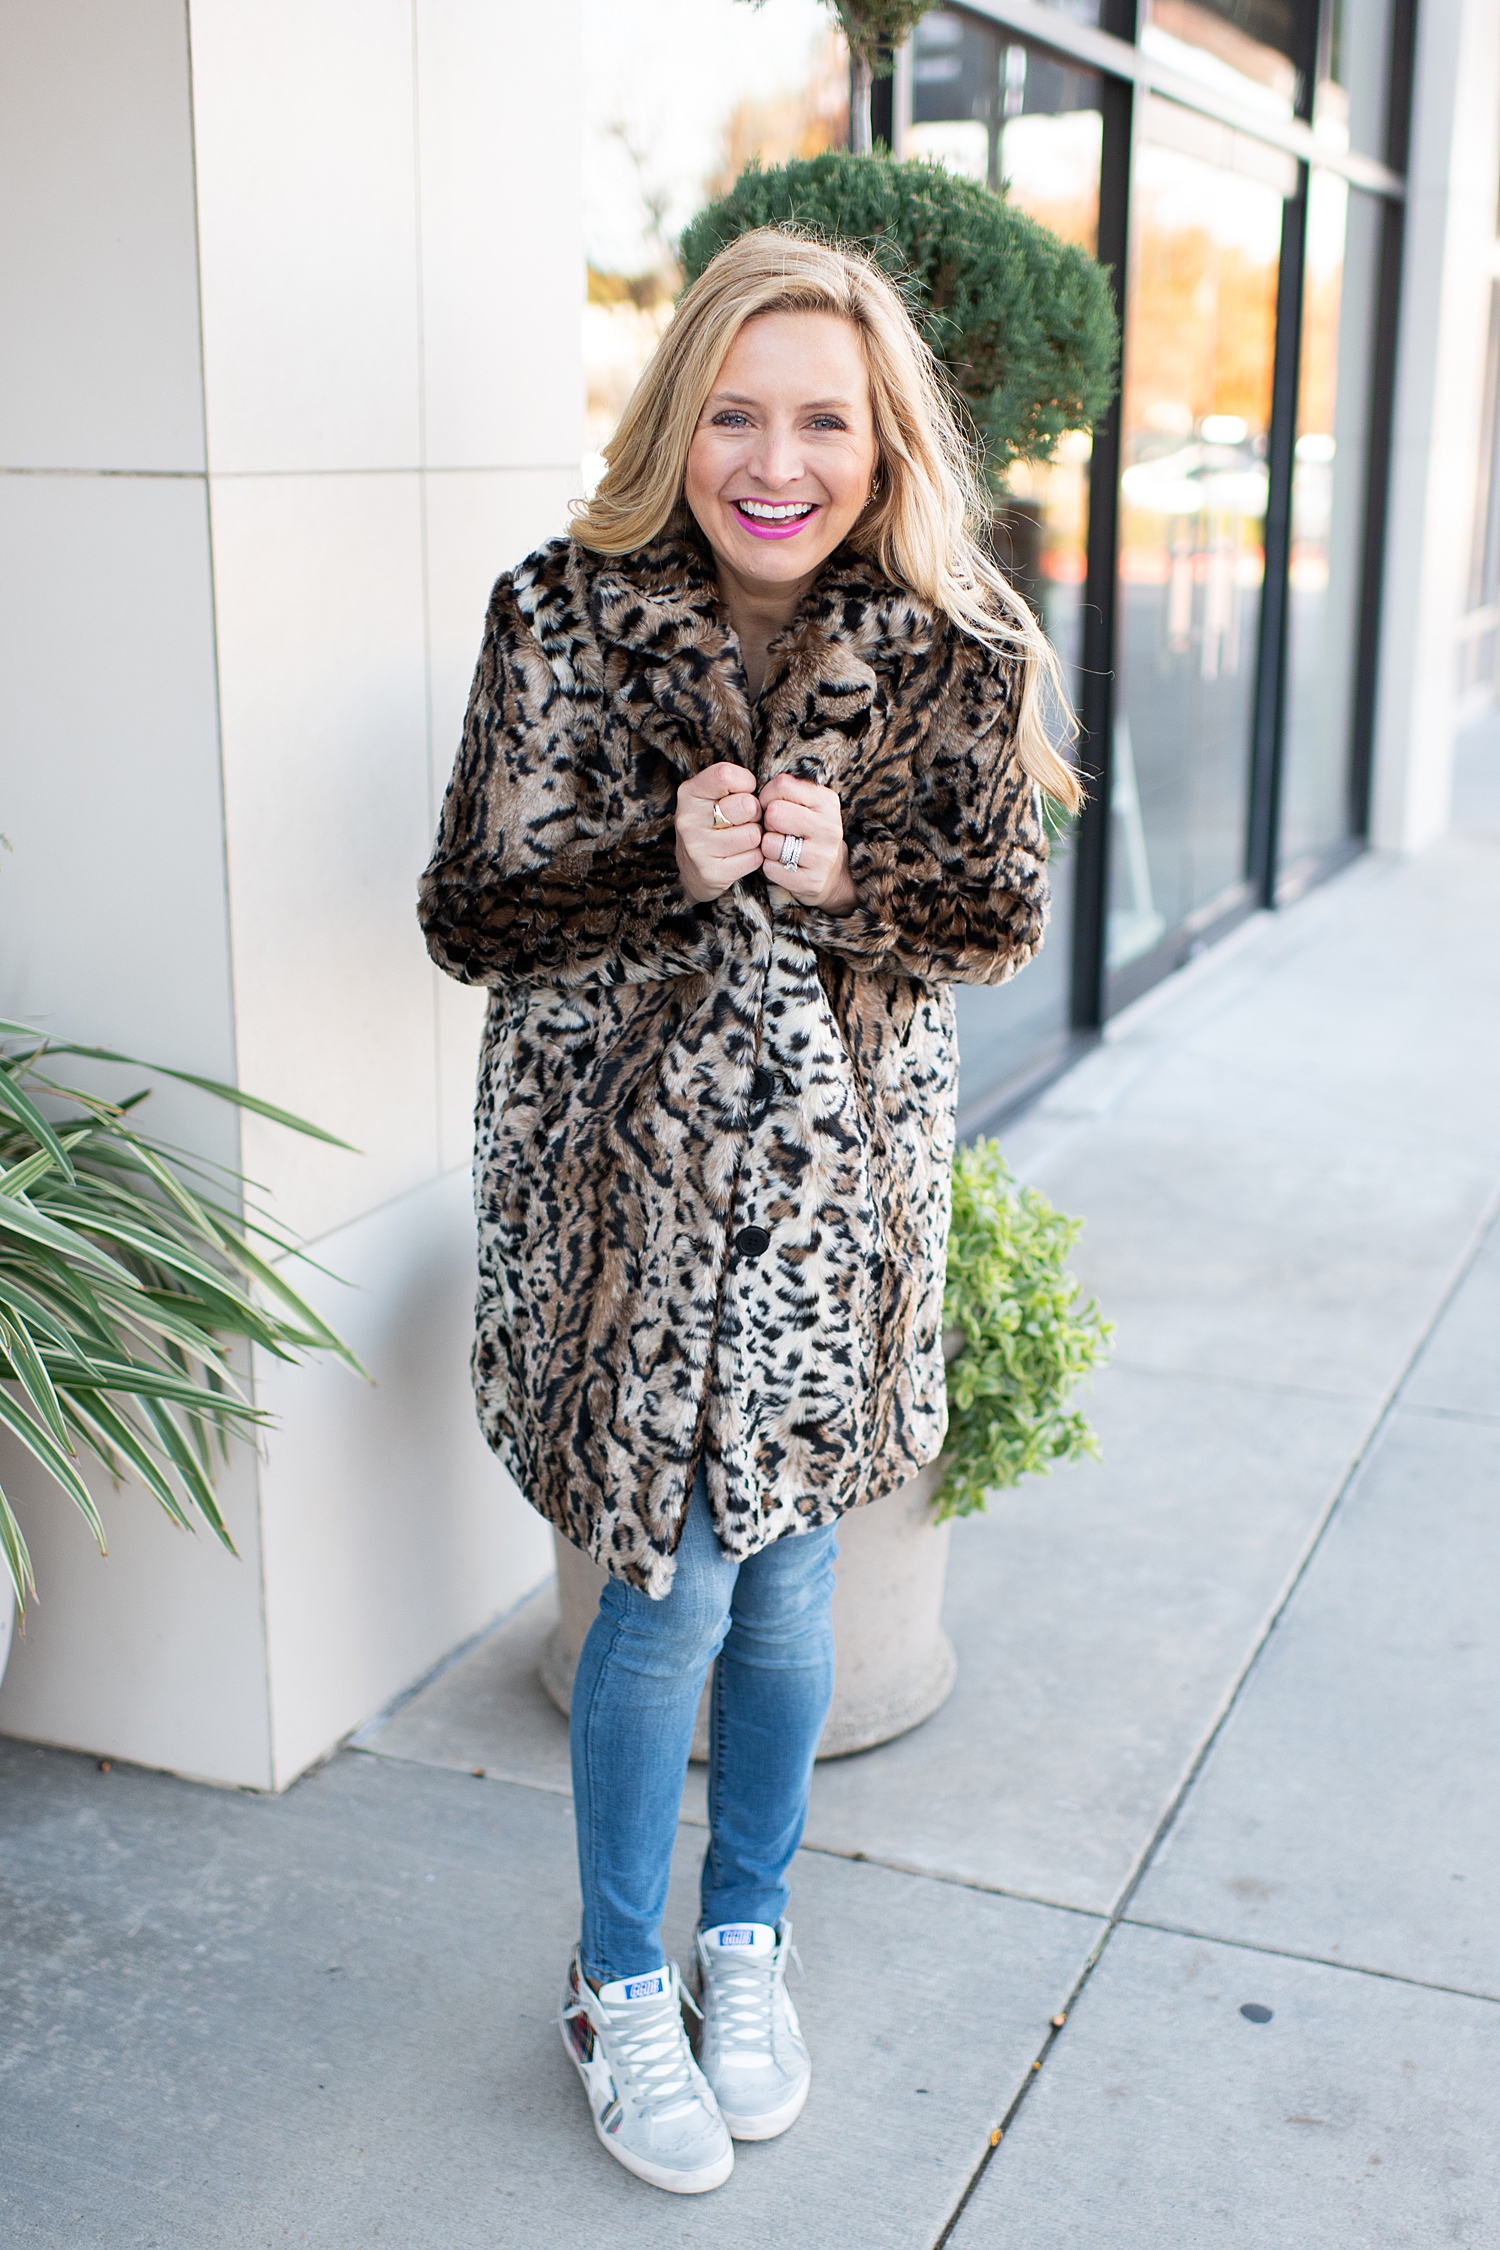 Fancy Ashley x Social Threads collection featured by top Houston fashion blogger, Fancy Ashley: image of a woman wearing a Social Threads leopard faux fur coat, Social Threads skinny jeans, and Golden Goose sneakers